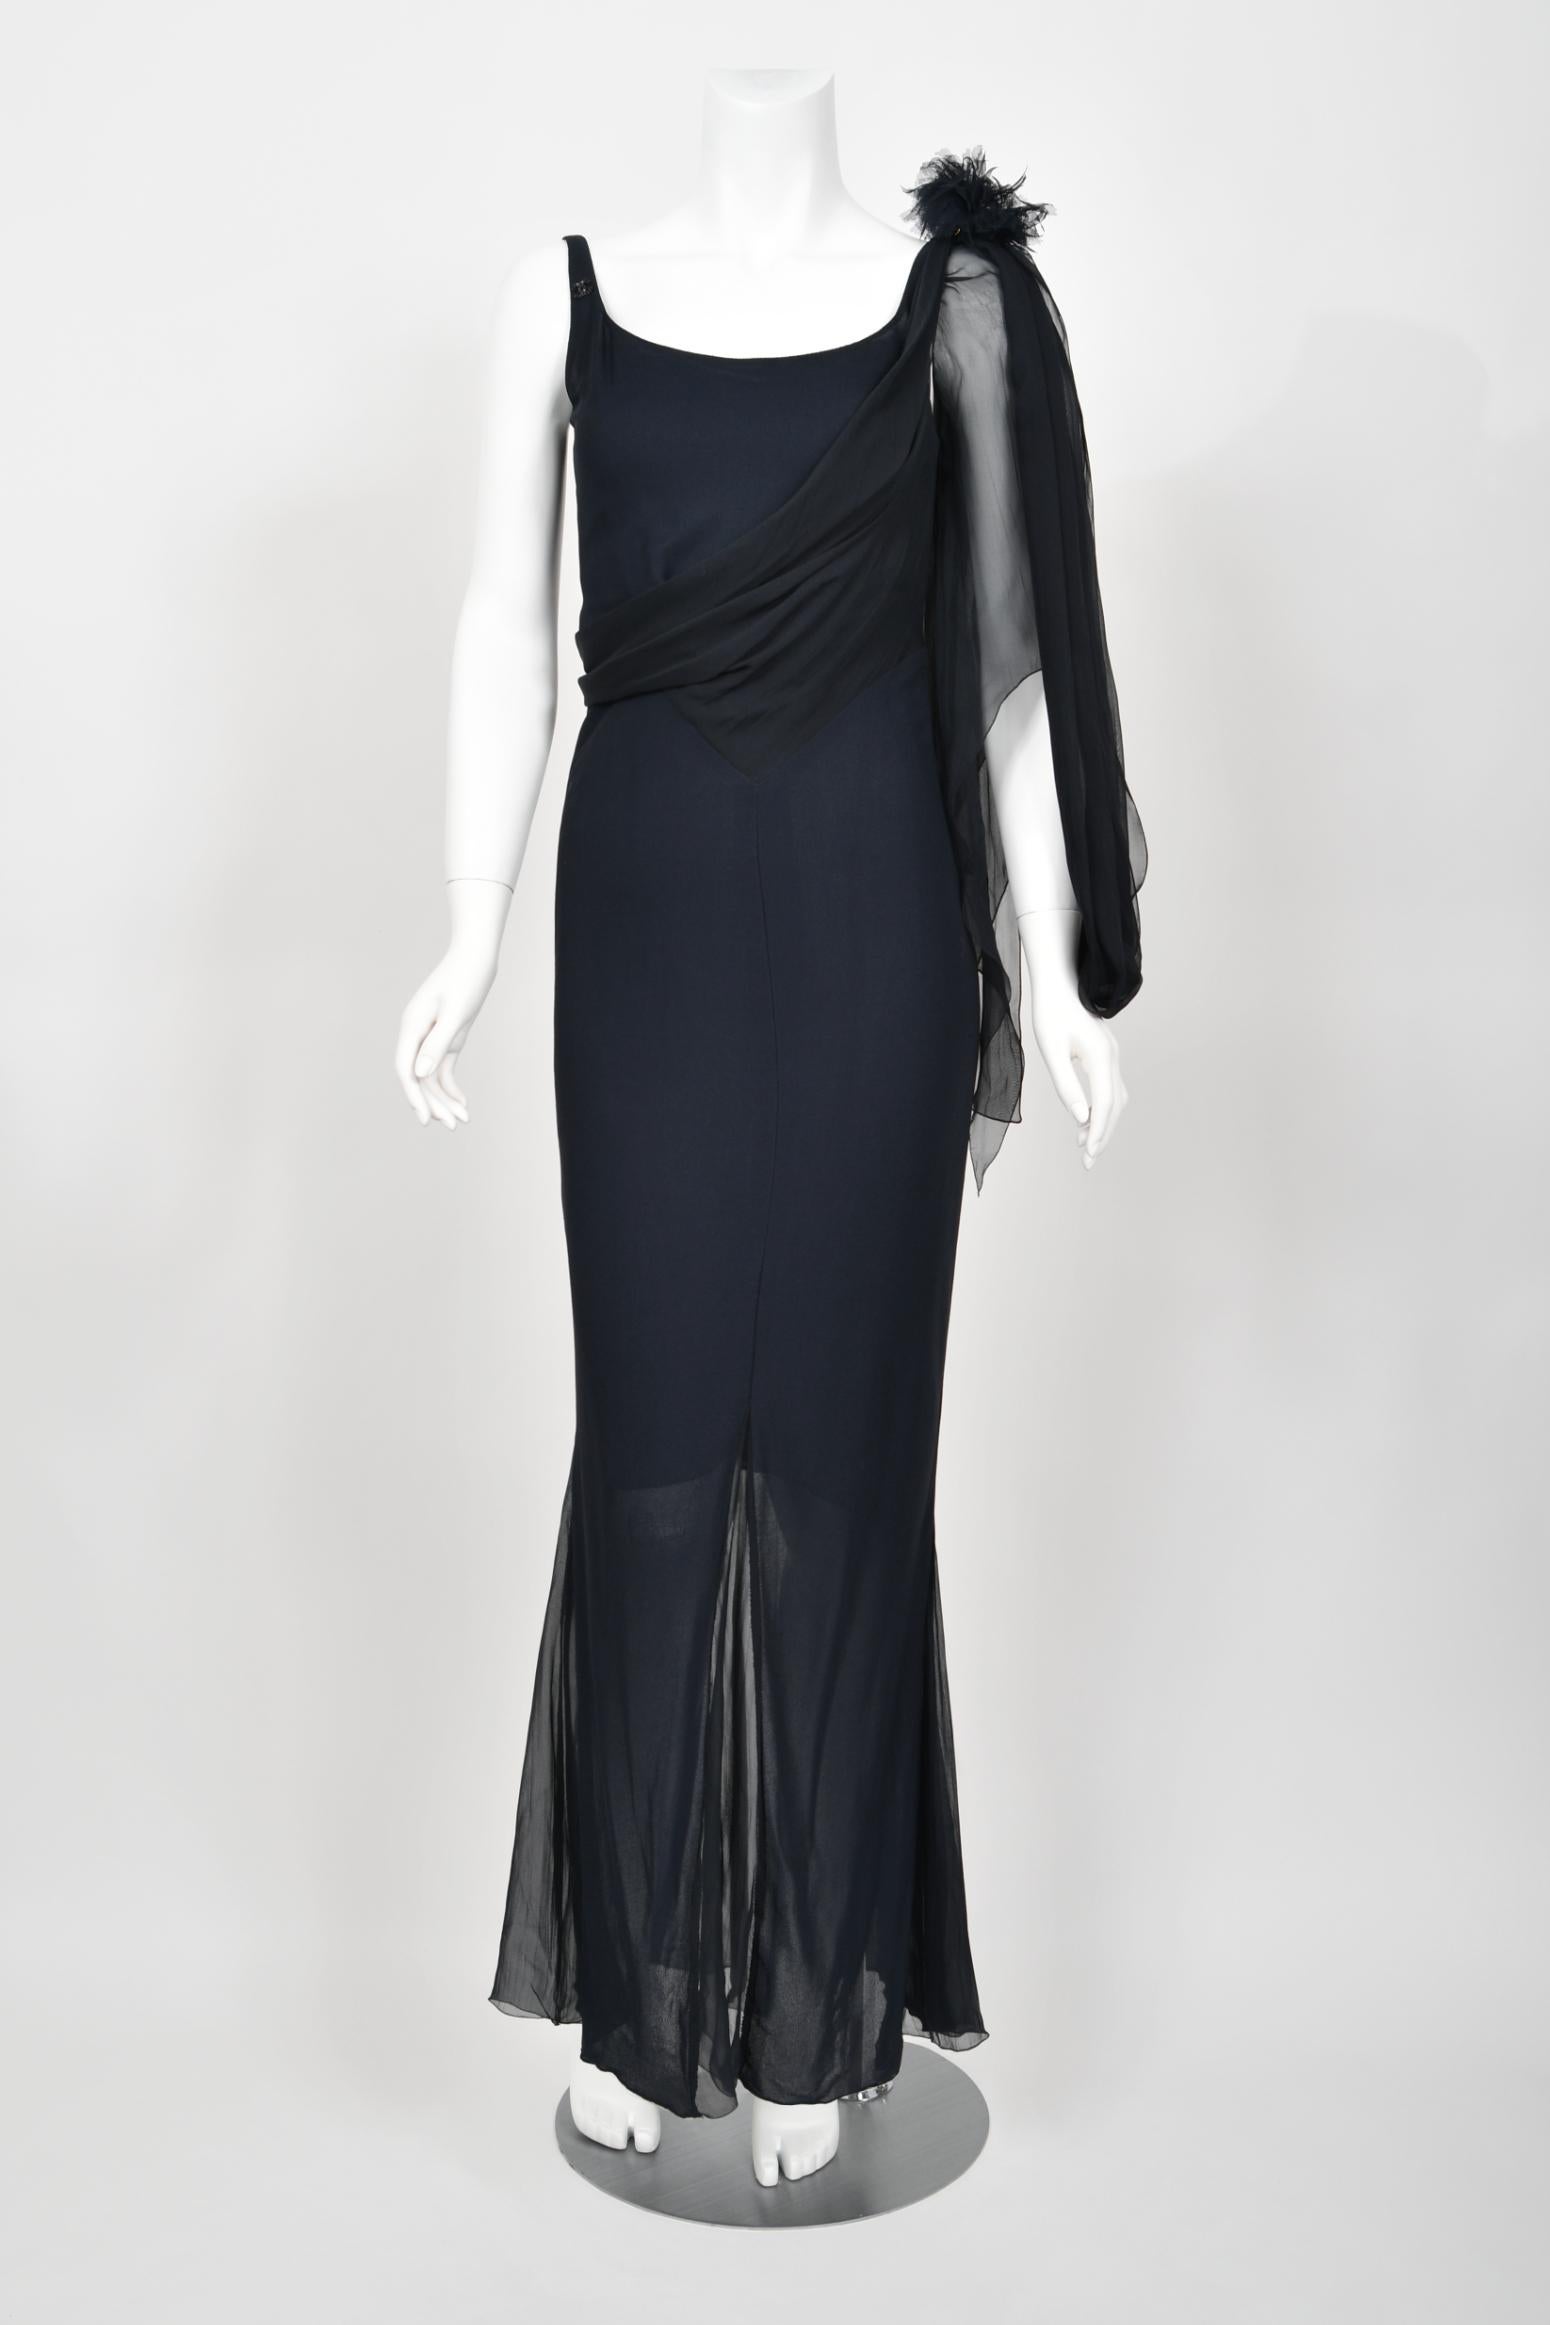 2002 Chanel Cruise Collection Midnight Blue Silk Chiffon Draped Bias-Cut Gown For Sale 11